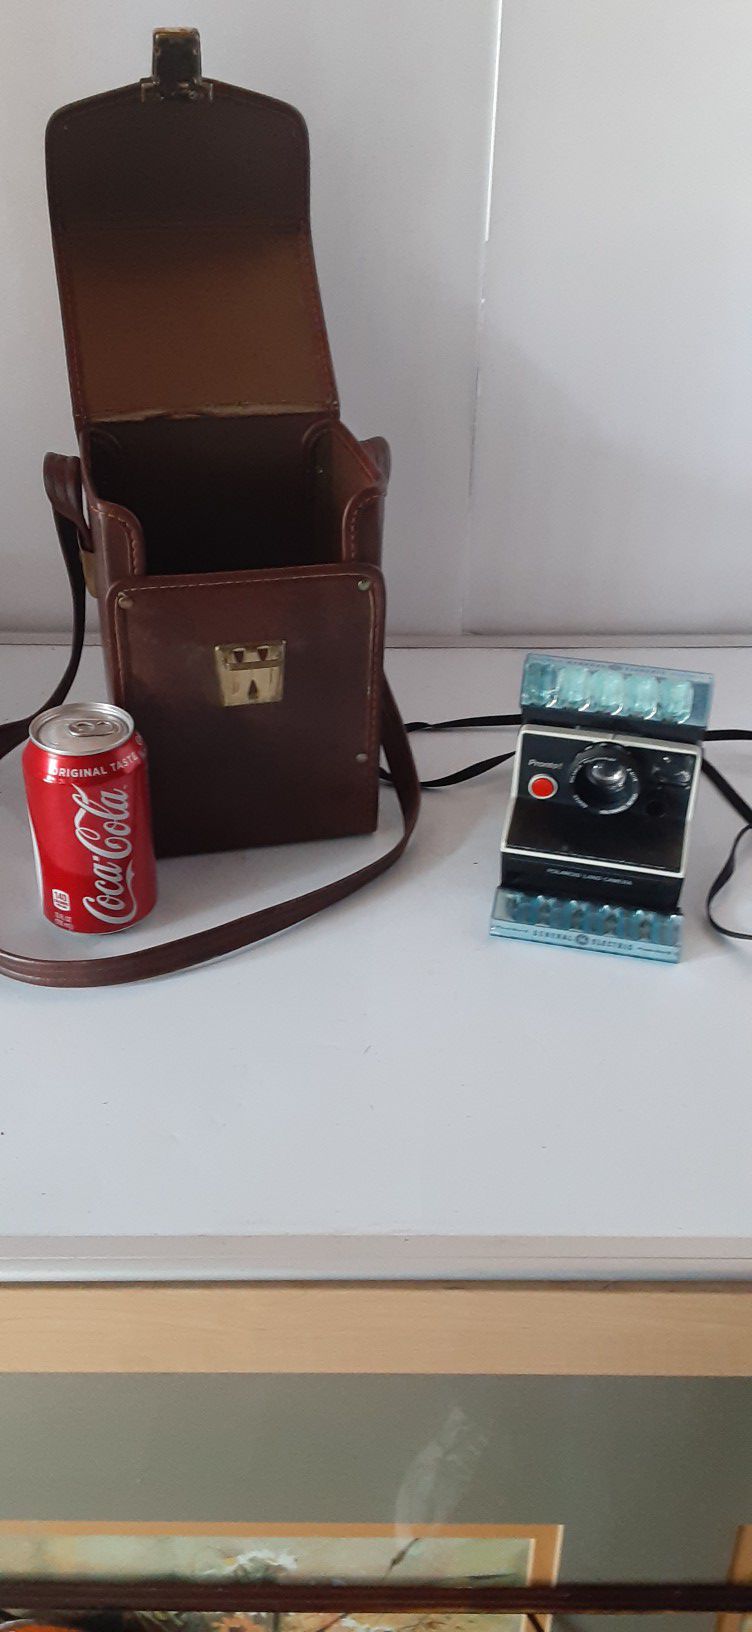 Vintage 1970's Pronto Polaroid Land Camera Instant Film Black One-Step with Leather Case and 2 GE Flashes, Straps